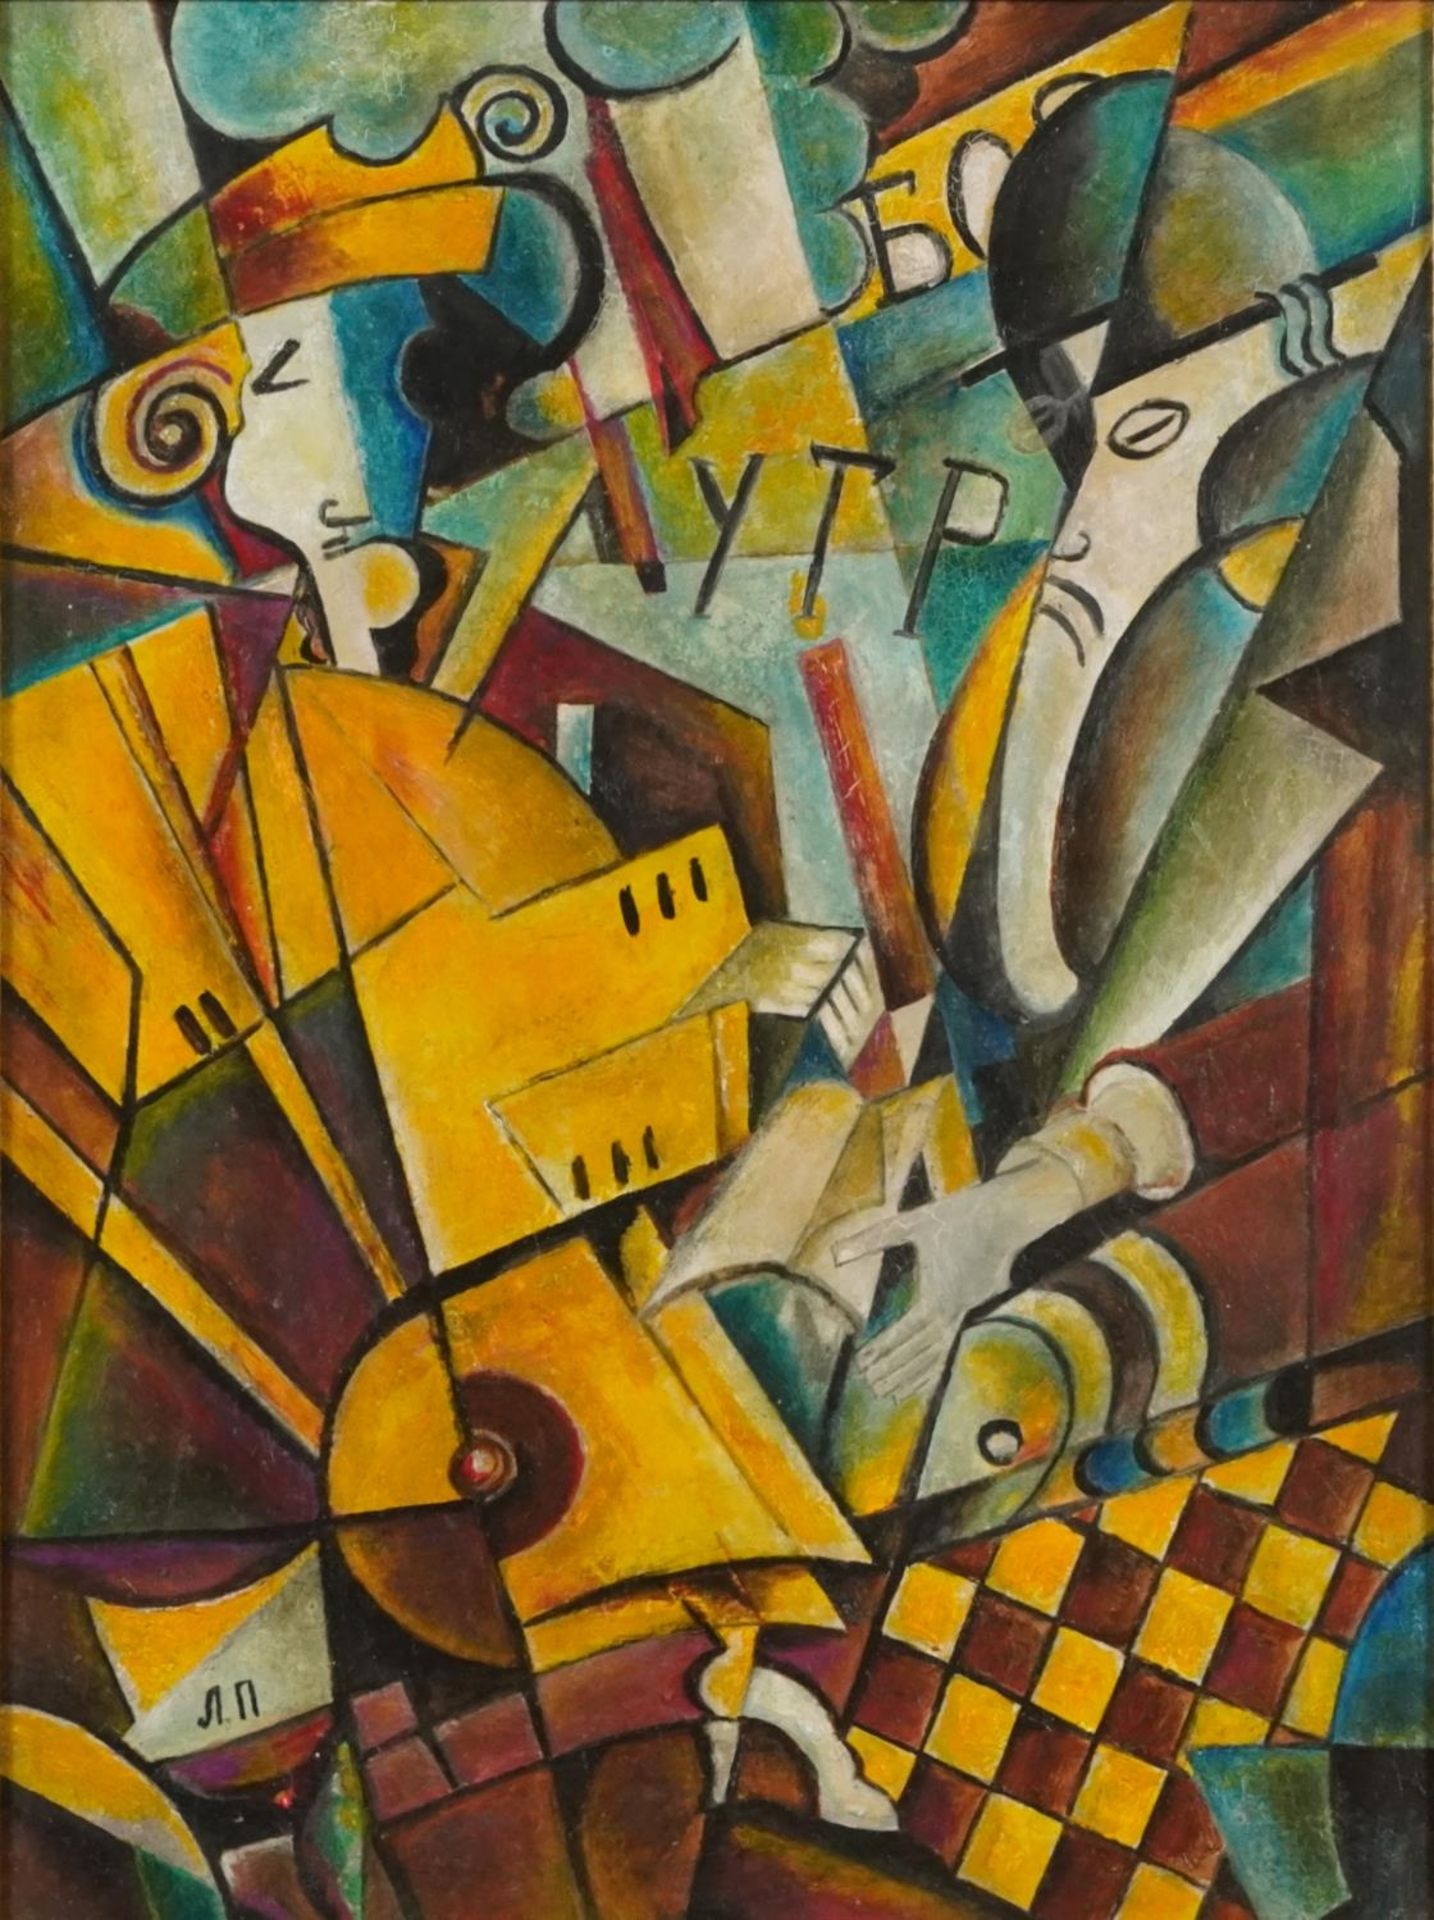 Liubov Sergeevna Popova - Abstract composition with figures, Russian oil on card, label and